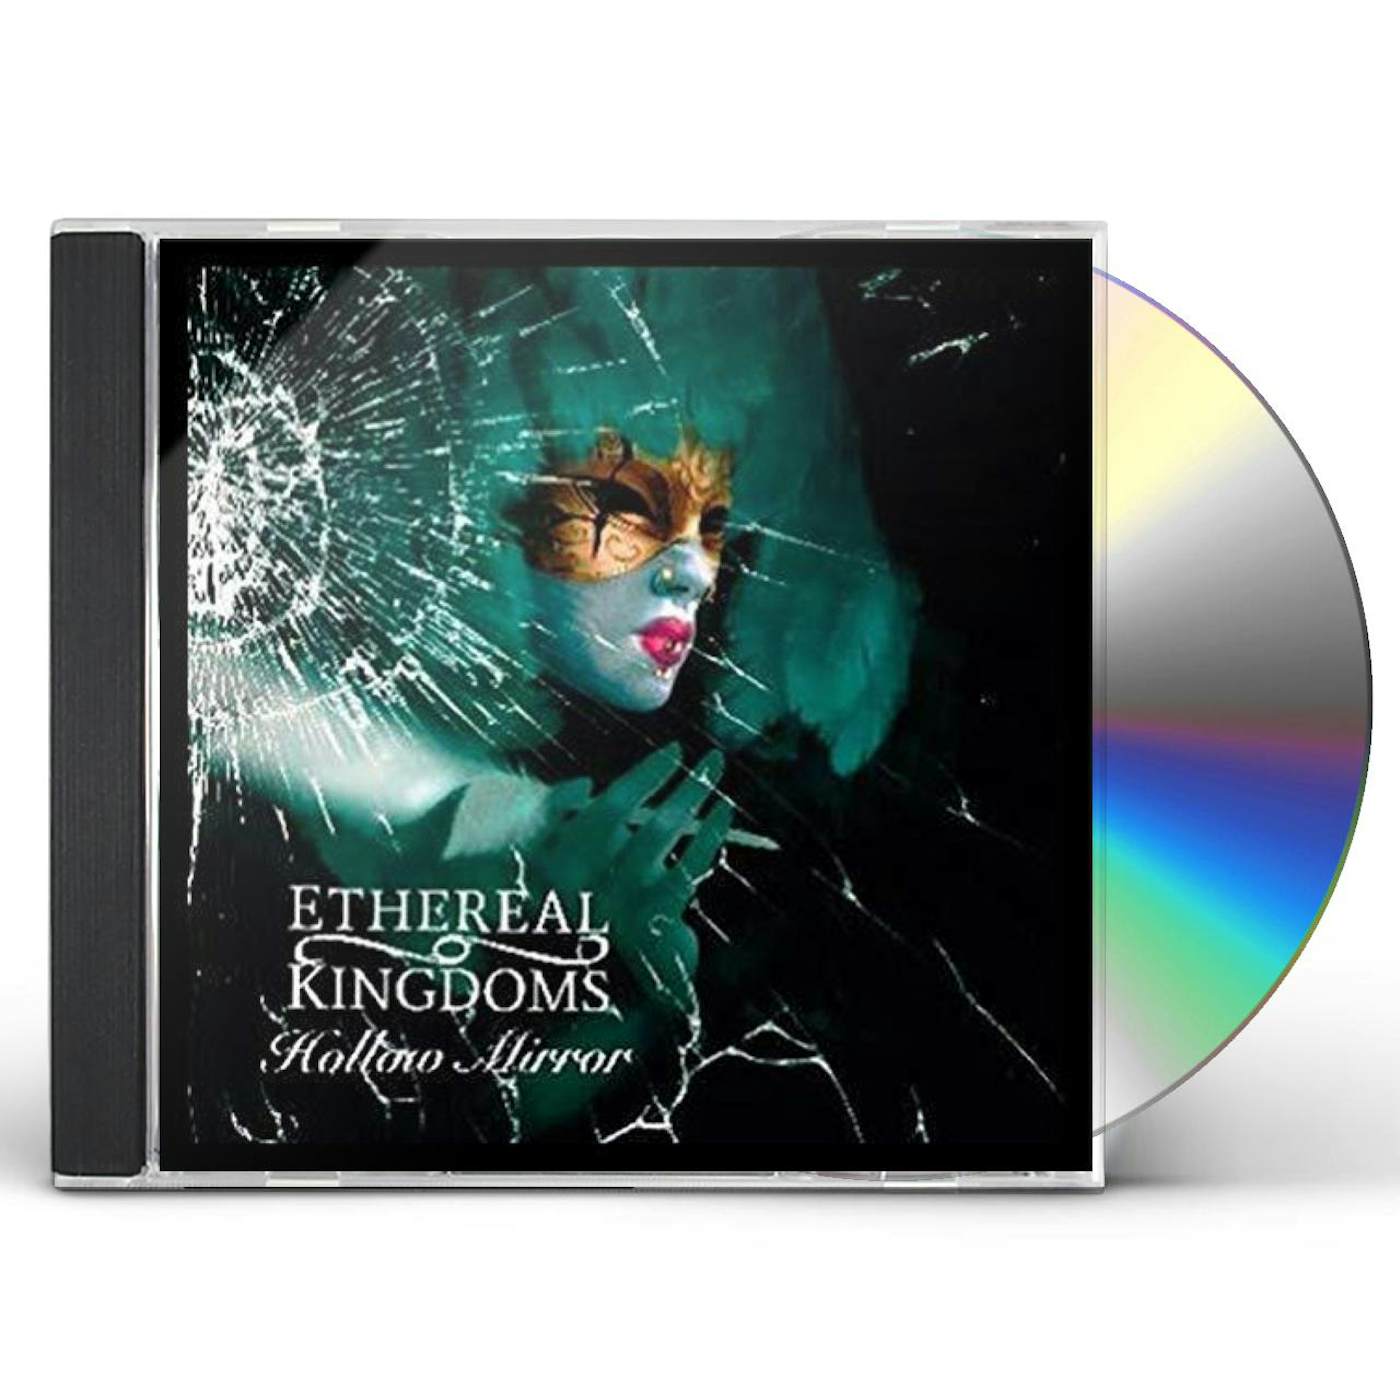 Ethereal Kingdoms Hollow mirror CD